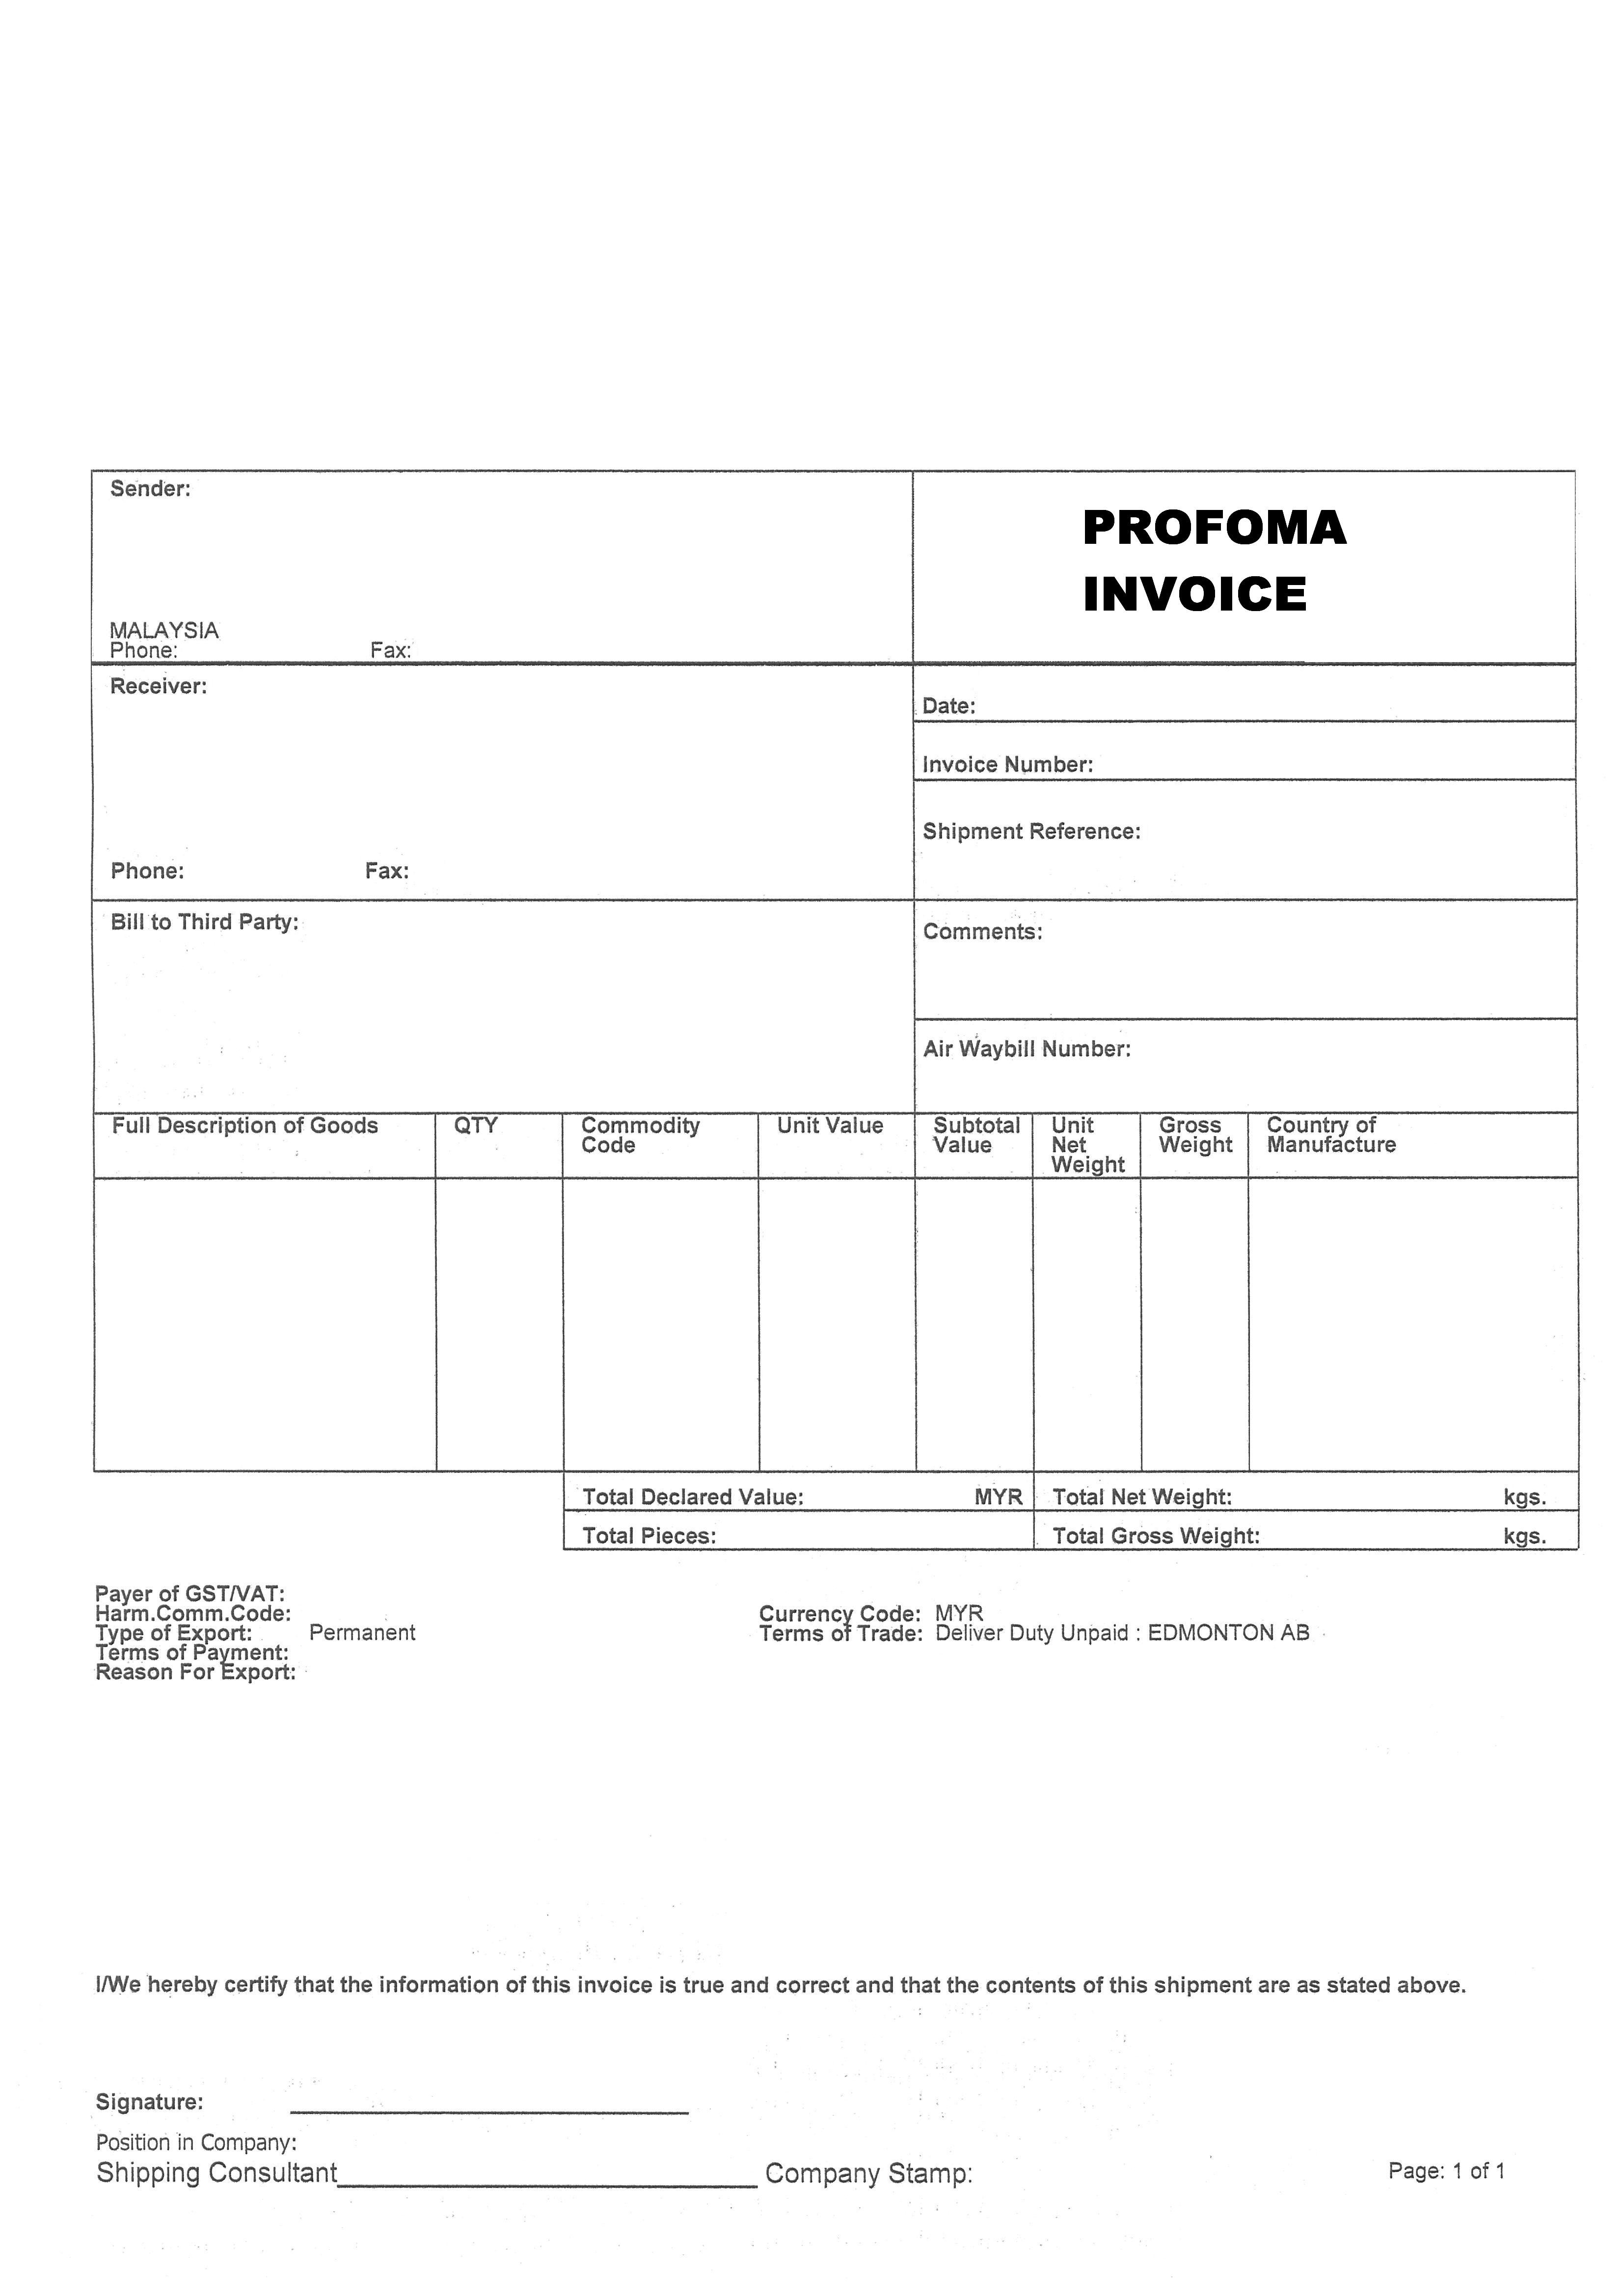 commercial invoice and proforma invoice welcome to mbe malaysia 3308 X 4678